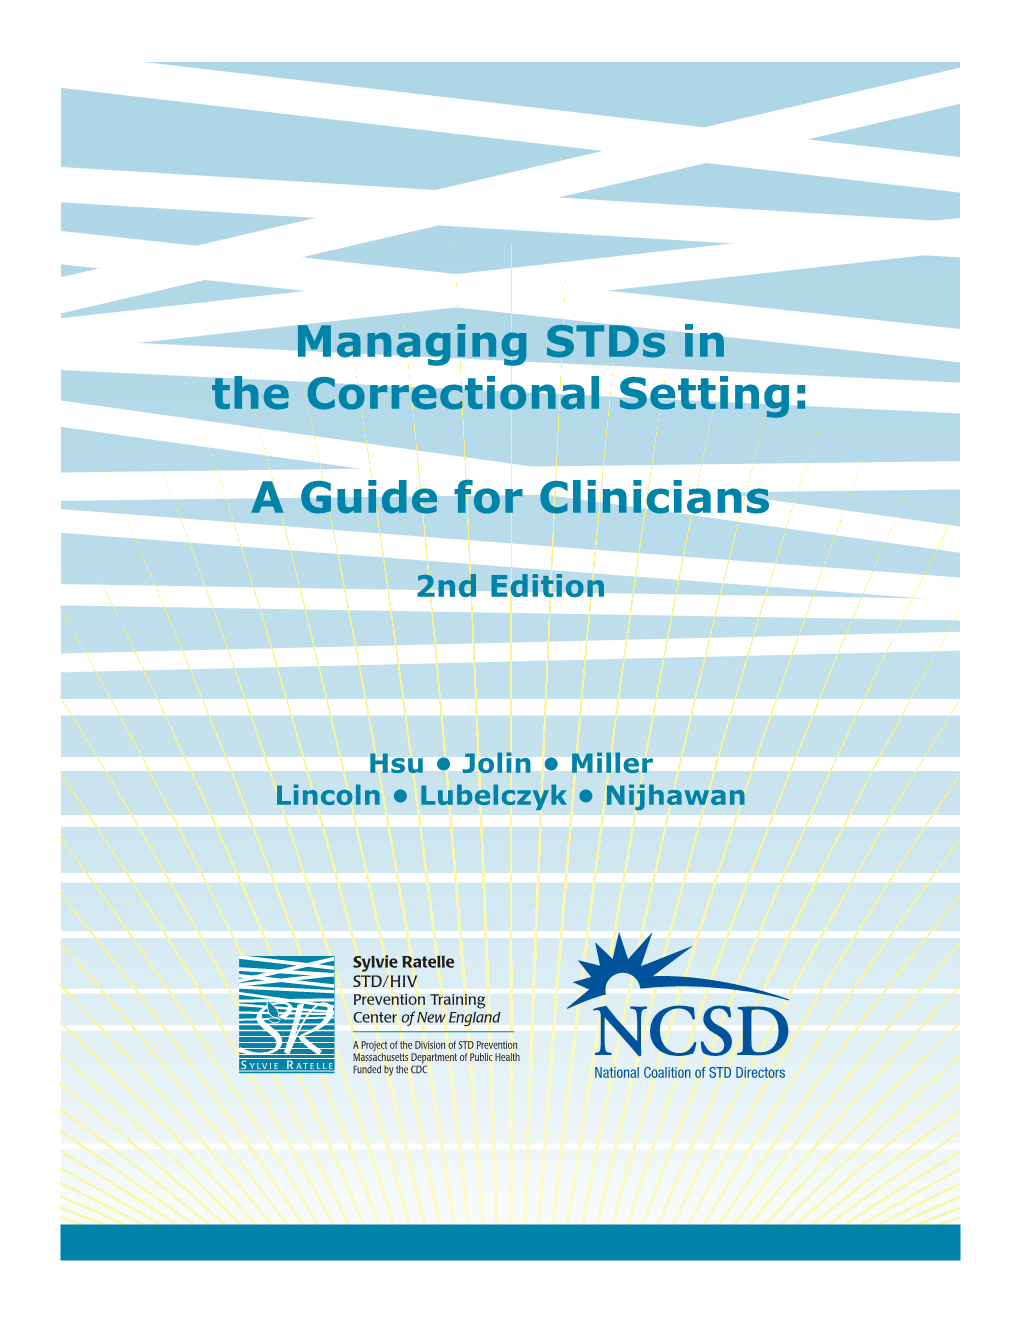 Managing Stds in the Correctional Setting